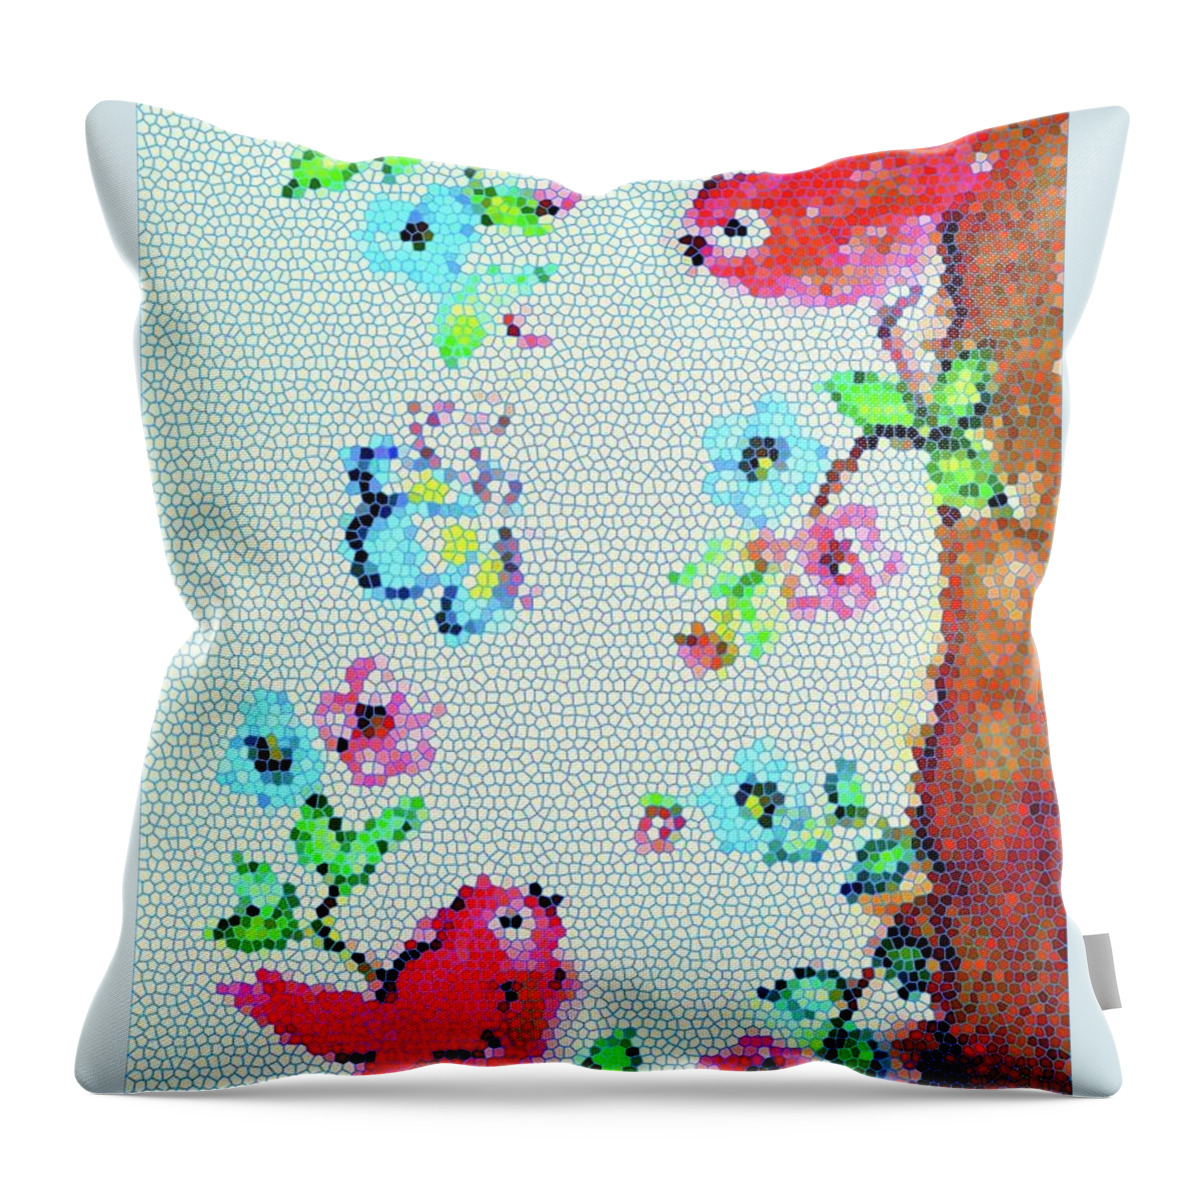 Two Red Birds Throw Pillow featuring the painting Springtime Mosaic by Hazel Holland